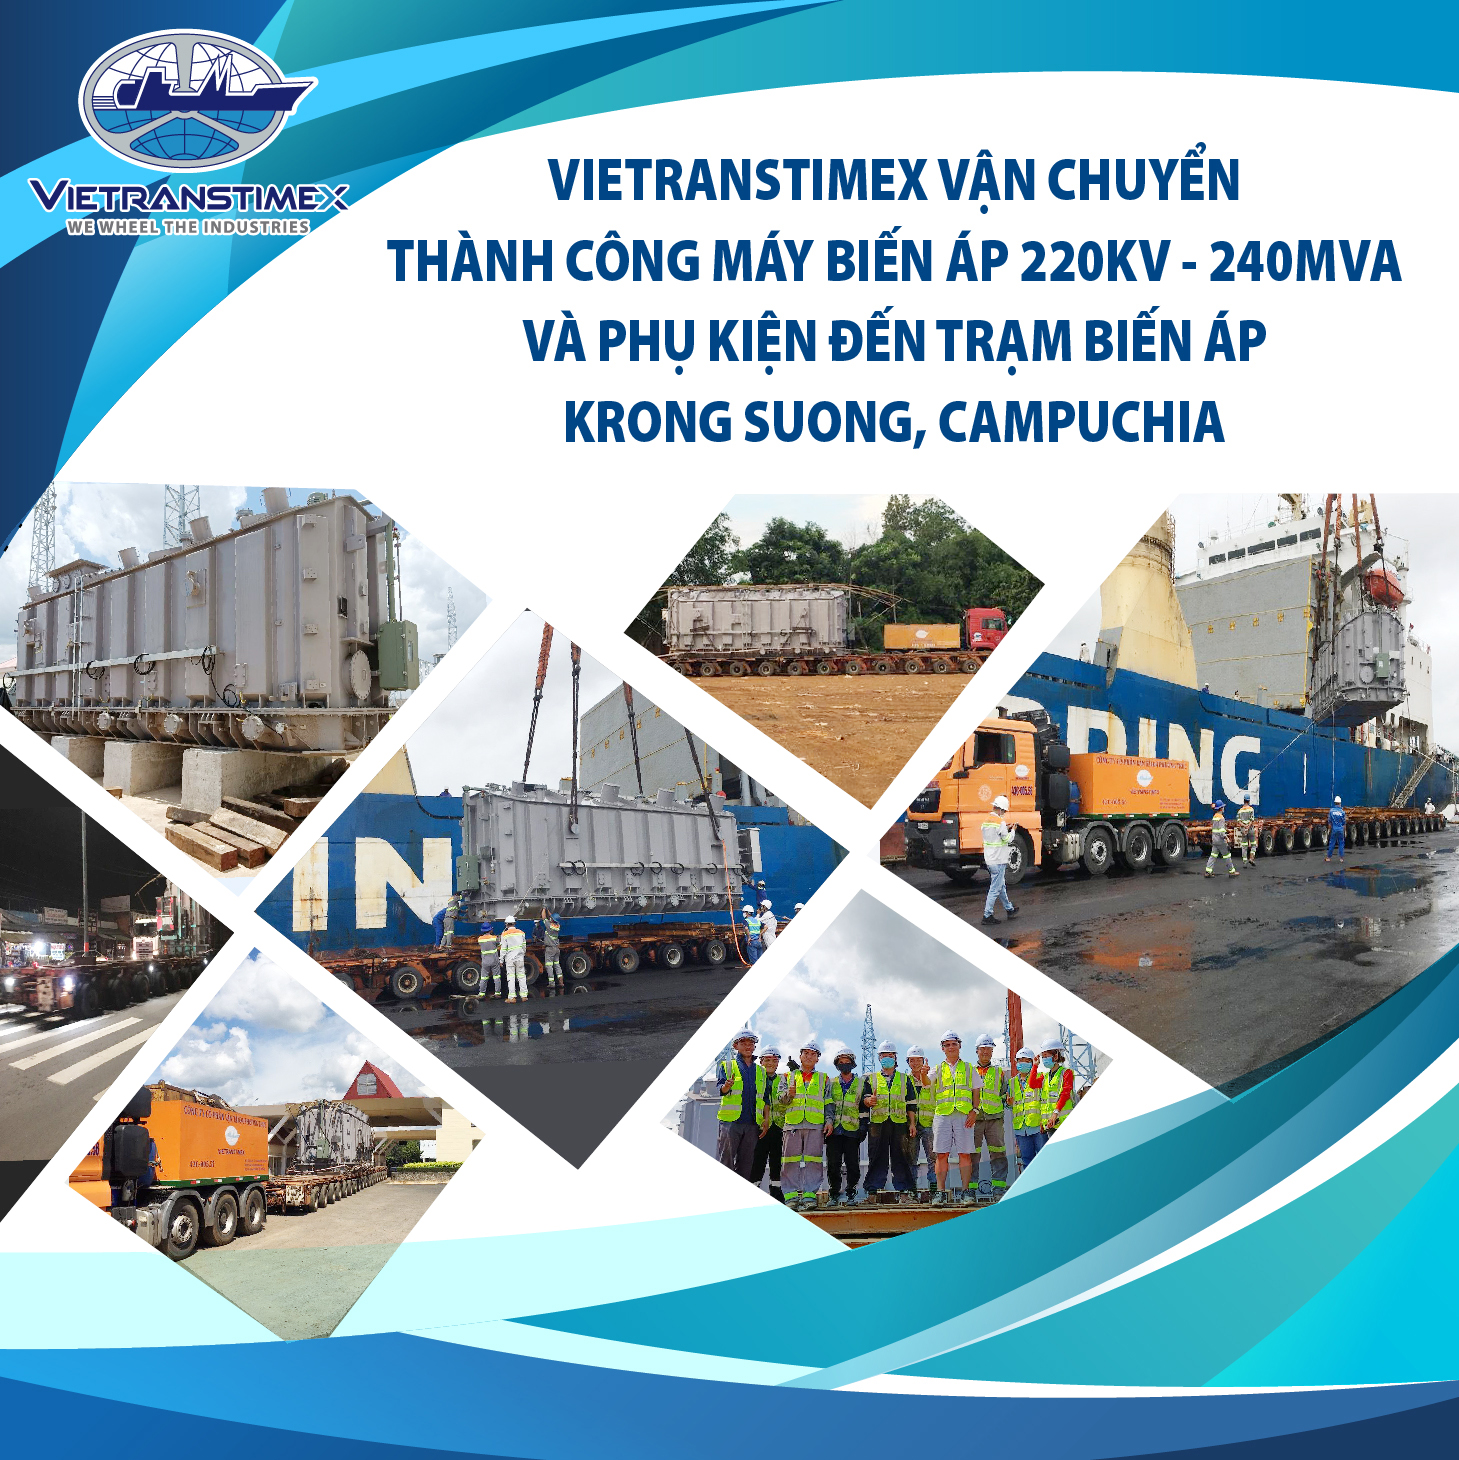 Vietranstimex Successfully Transported The 220kV – 240MVA Transformer And Associated Fittings To Krong Suong Substation In Cambodia